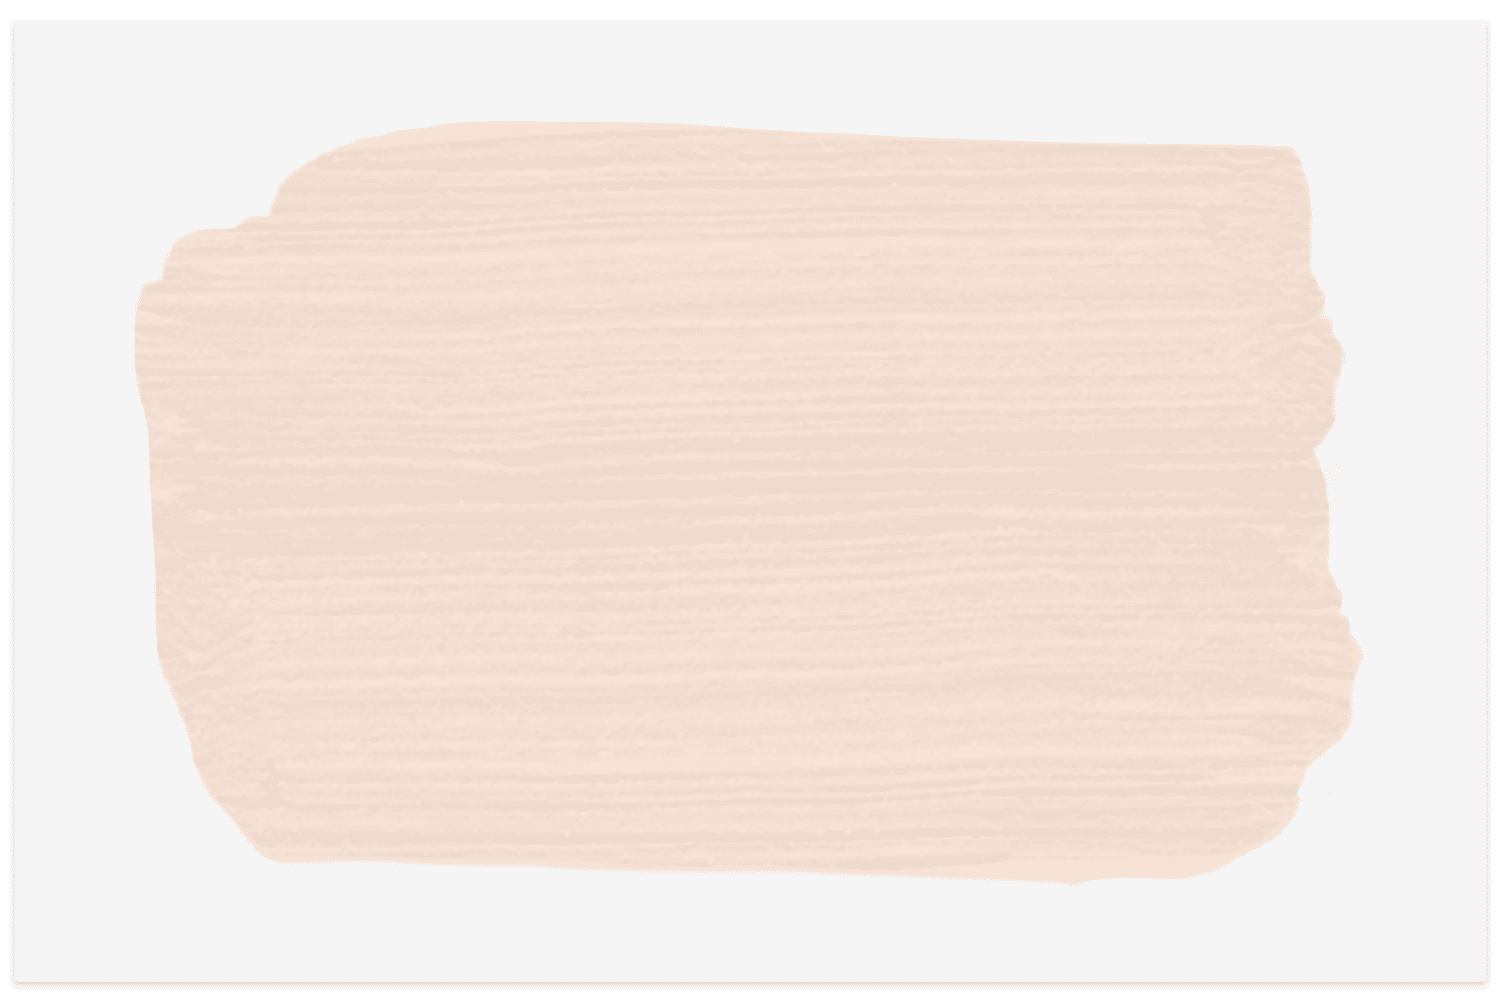 Behr Almond Kiss Farbmuster